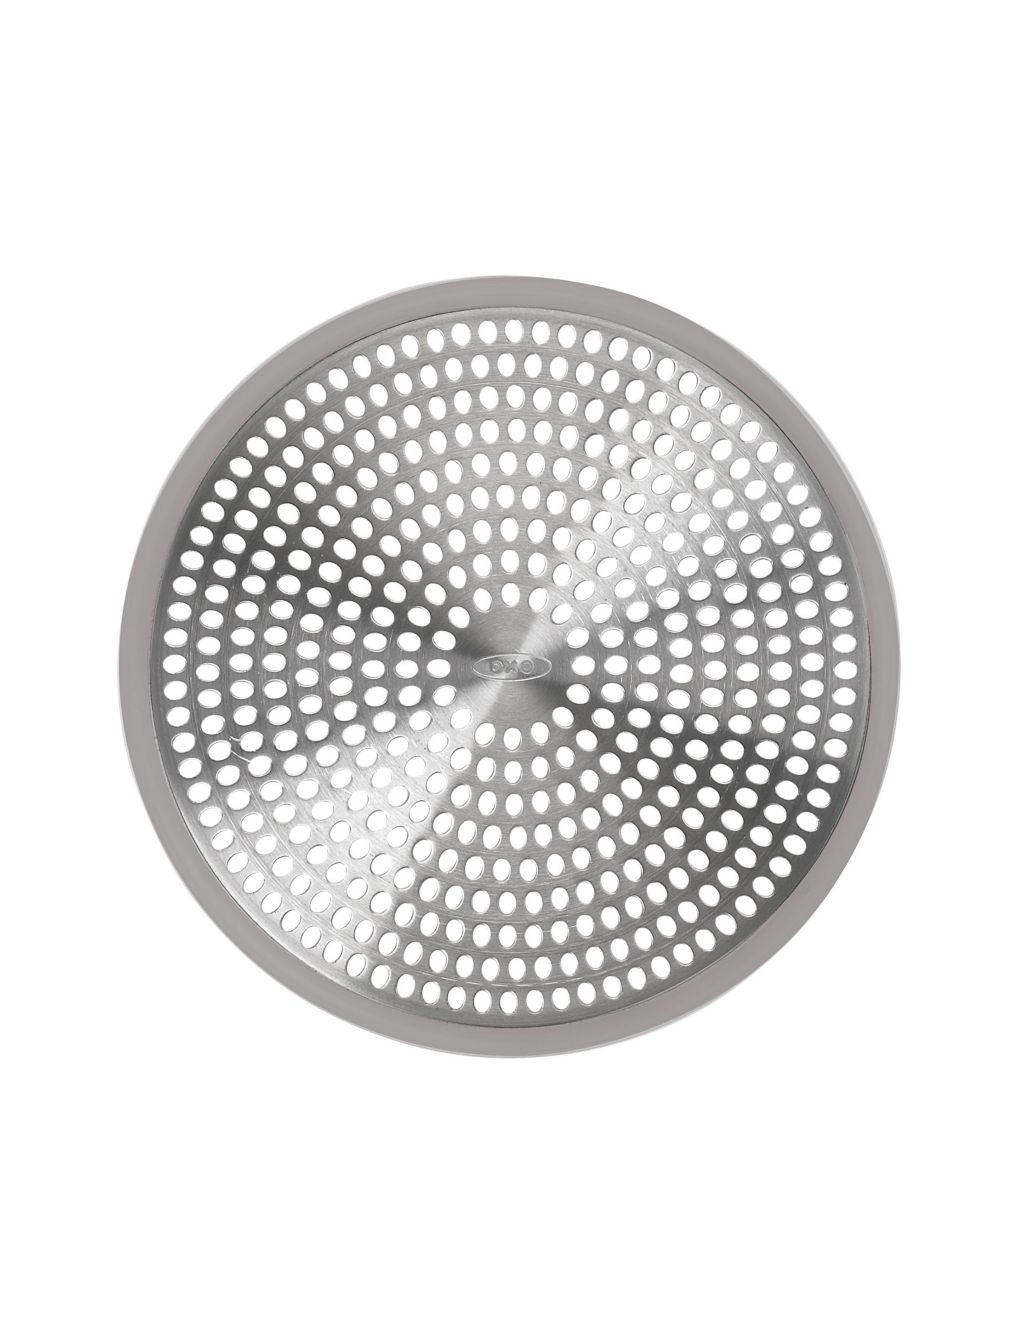 Good Grips Shower Drain Protector image 1